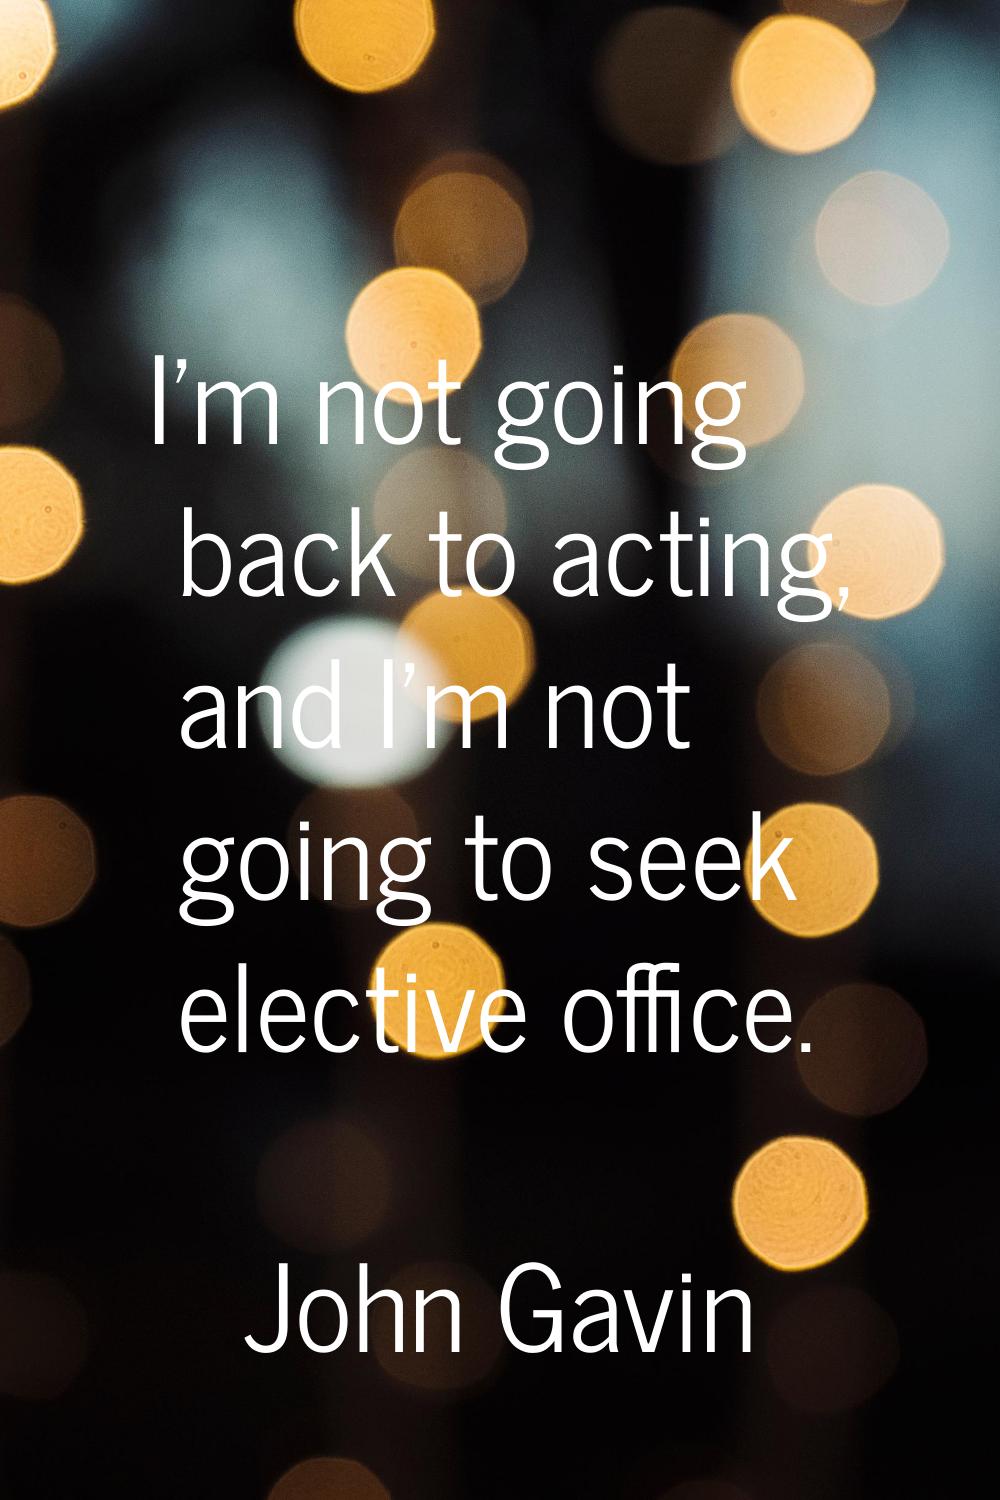 I'm not going back to acting, and I'm not going to seek elective office.